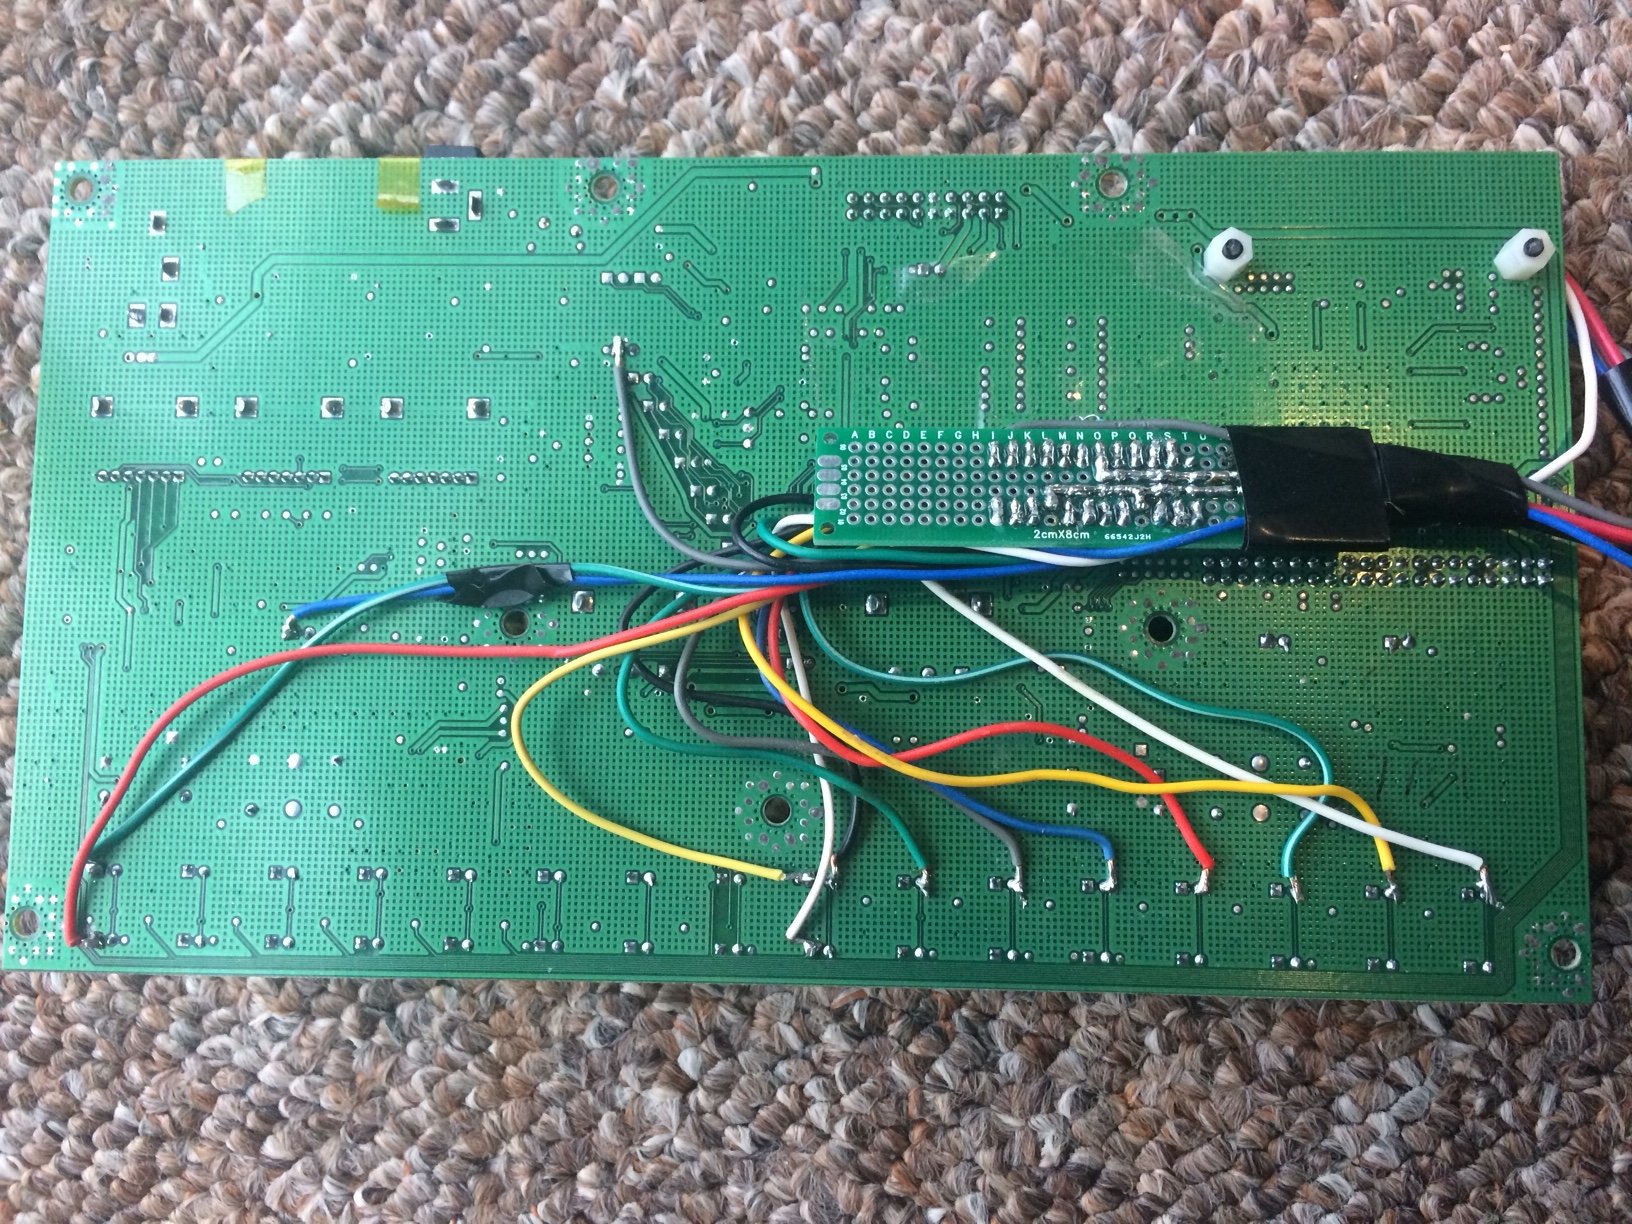 Image of Daughter Board with MAX7219 Chip